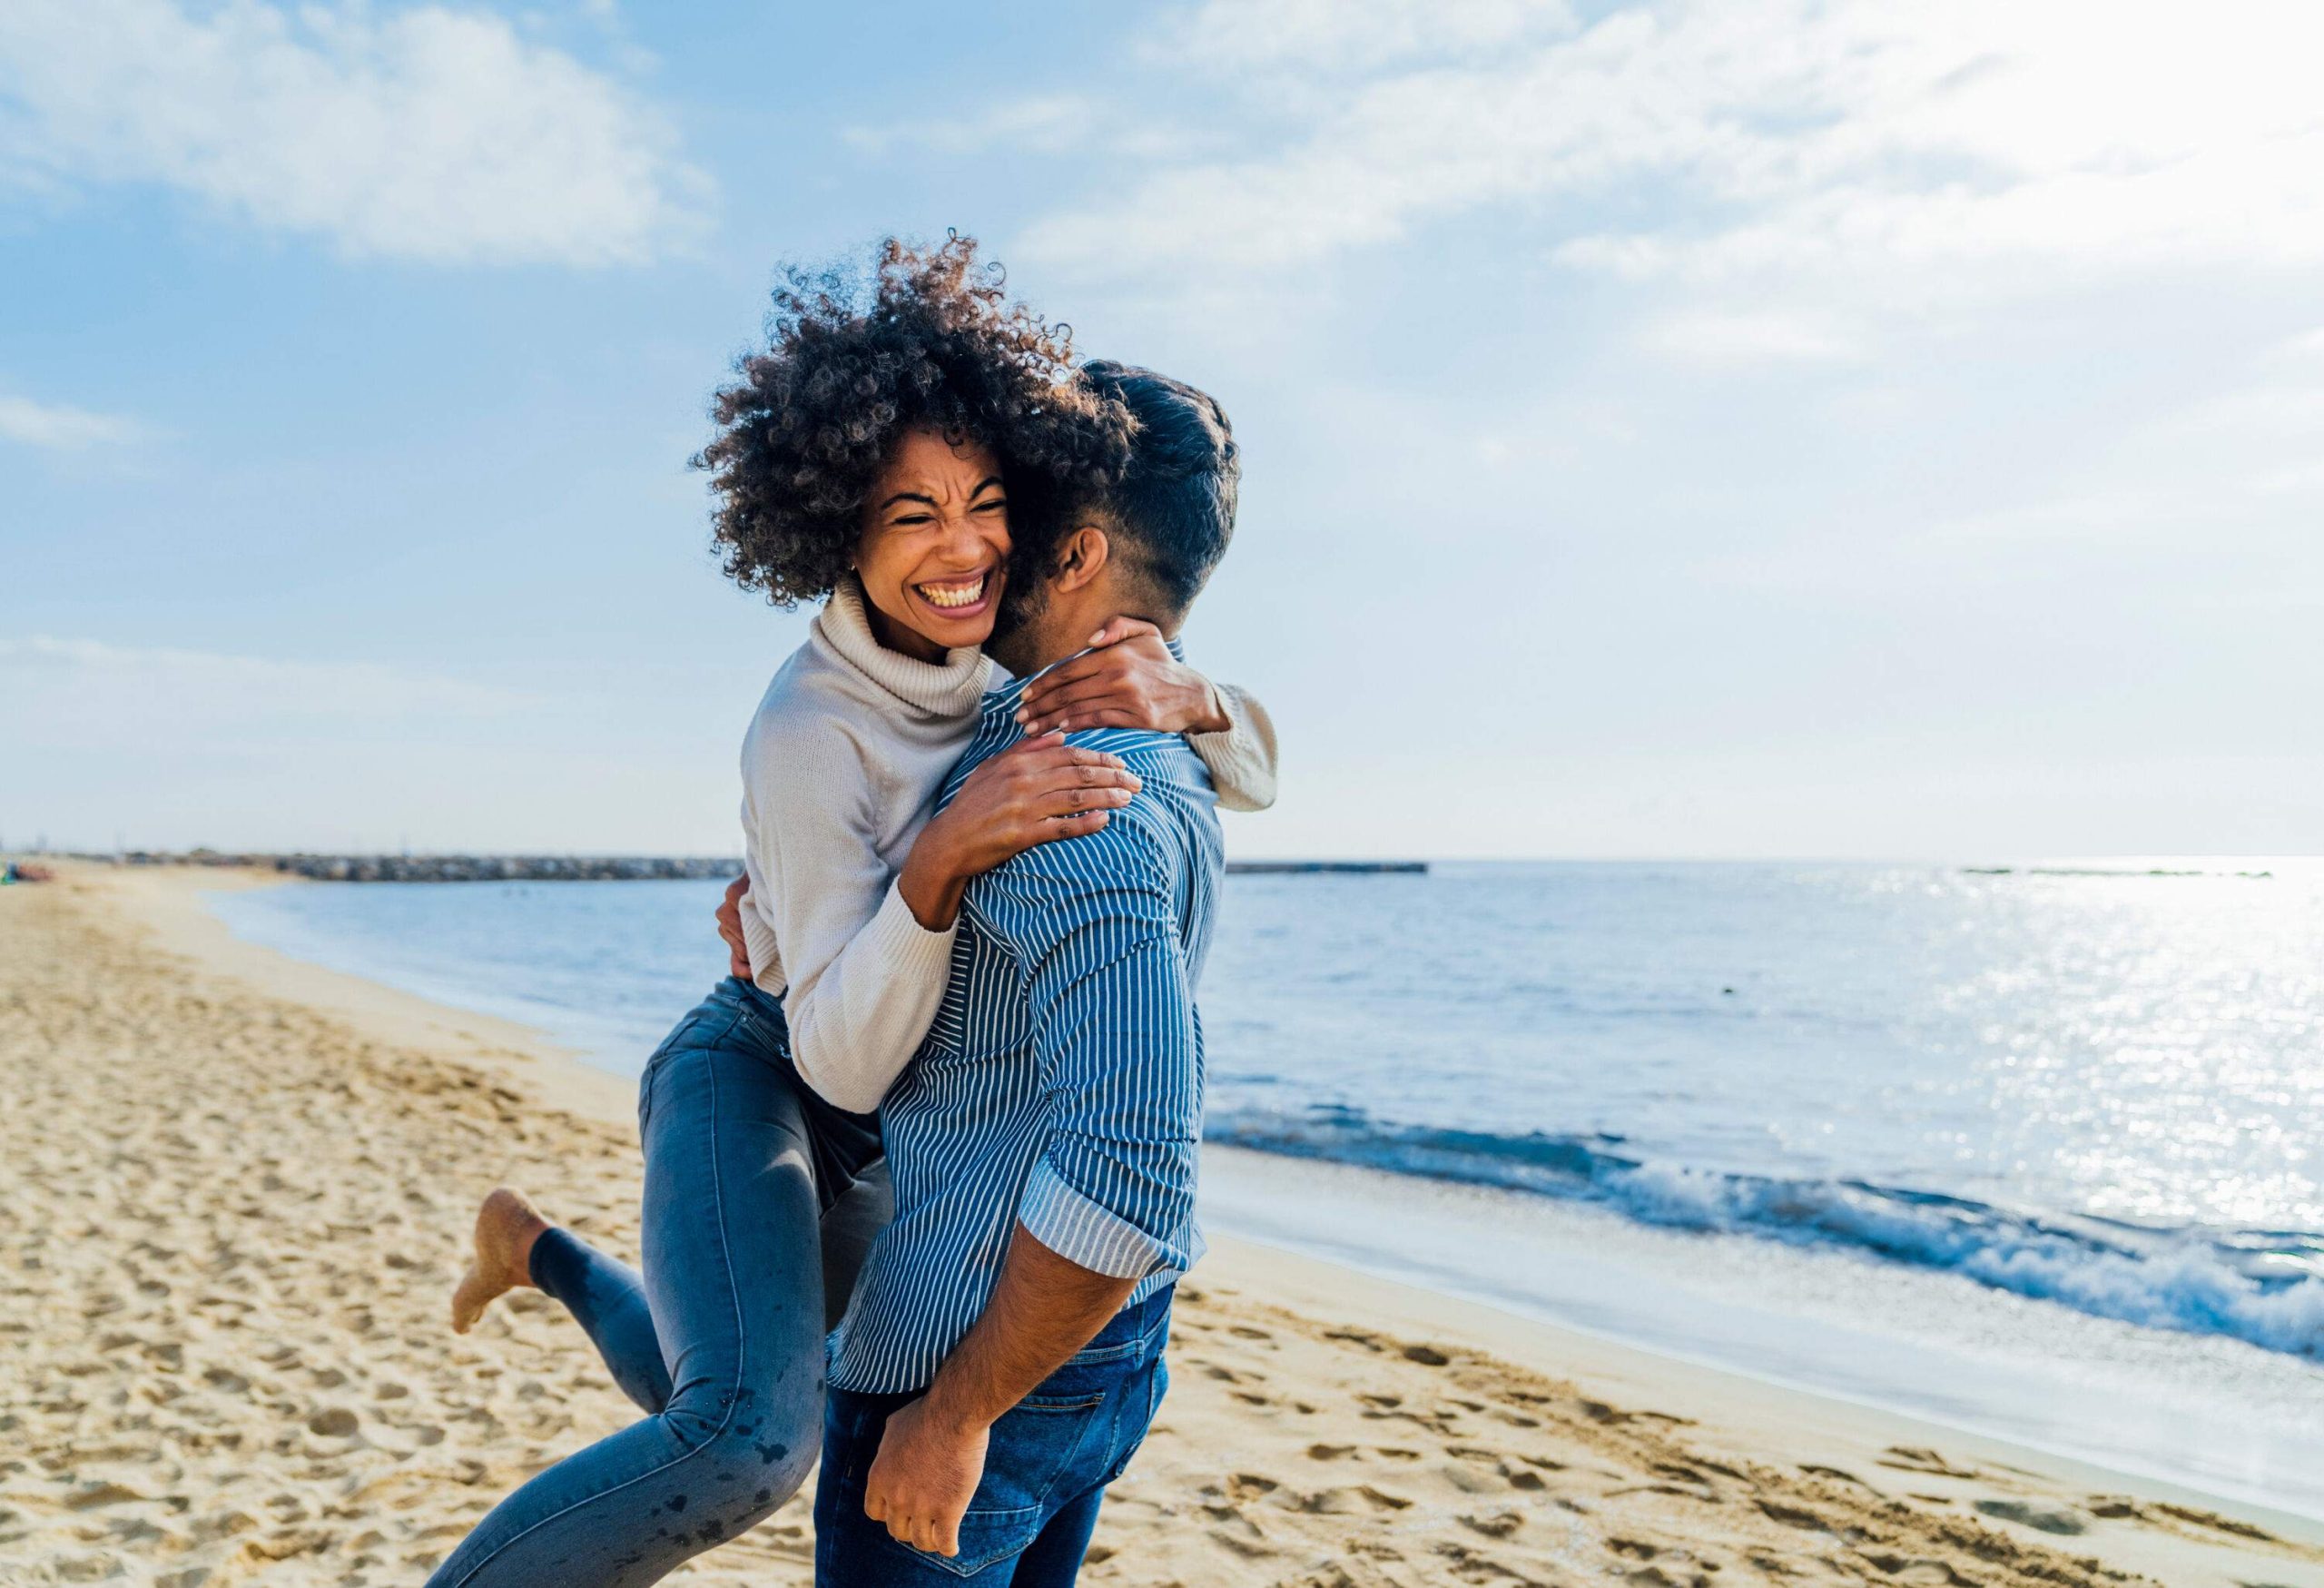 A curly-haired woman jumps and hugs a man on the beach.